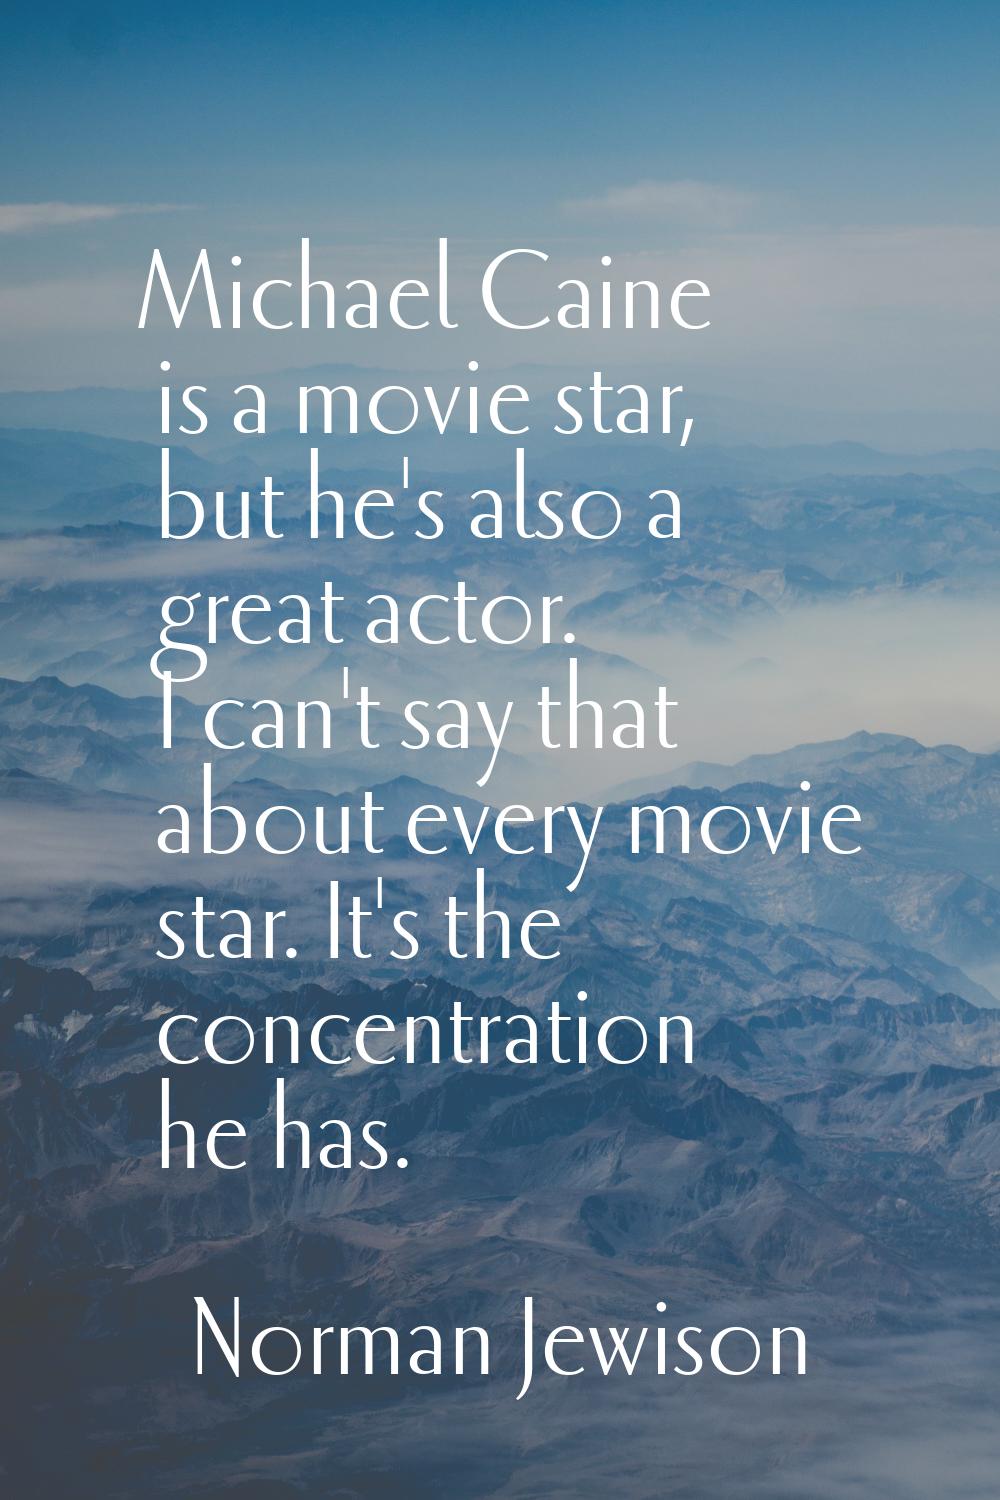 Michael Caine is a movie star, but he's also a great actor. I can't say that about every movie star